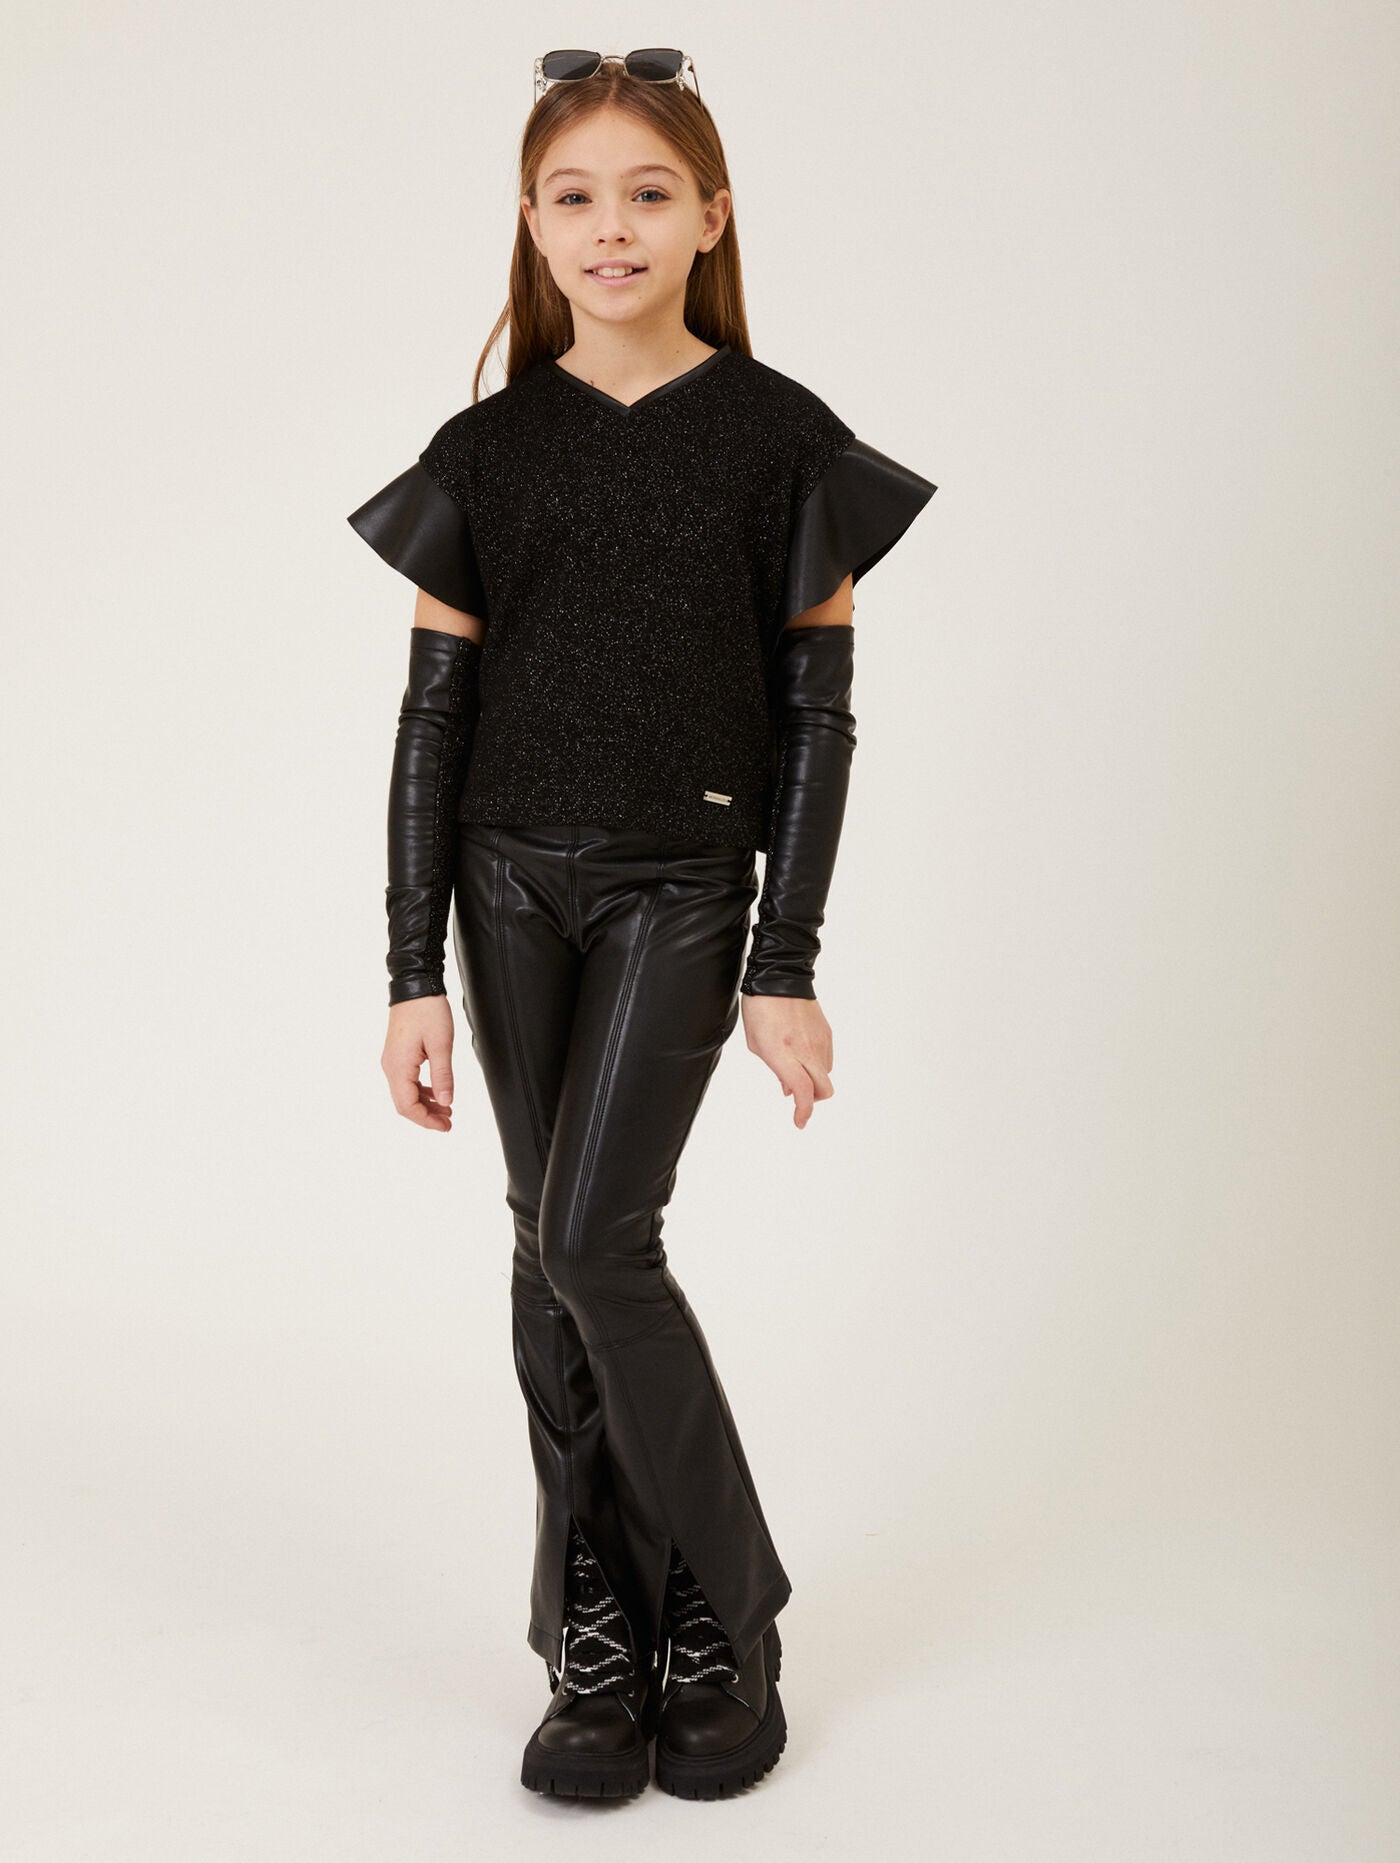 Monnalisa Coated fabric trousers with slits